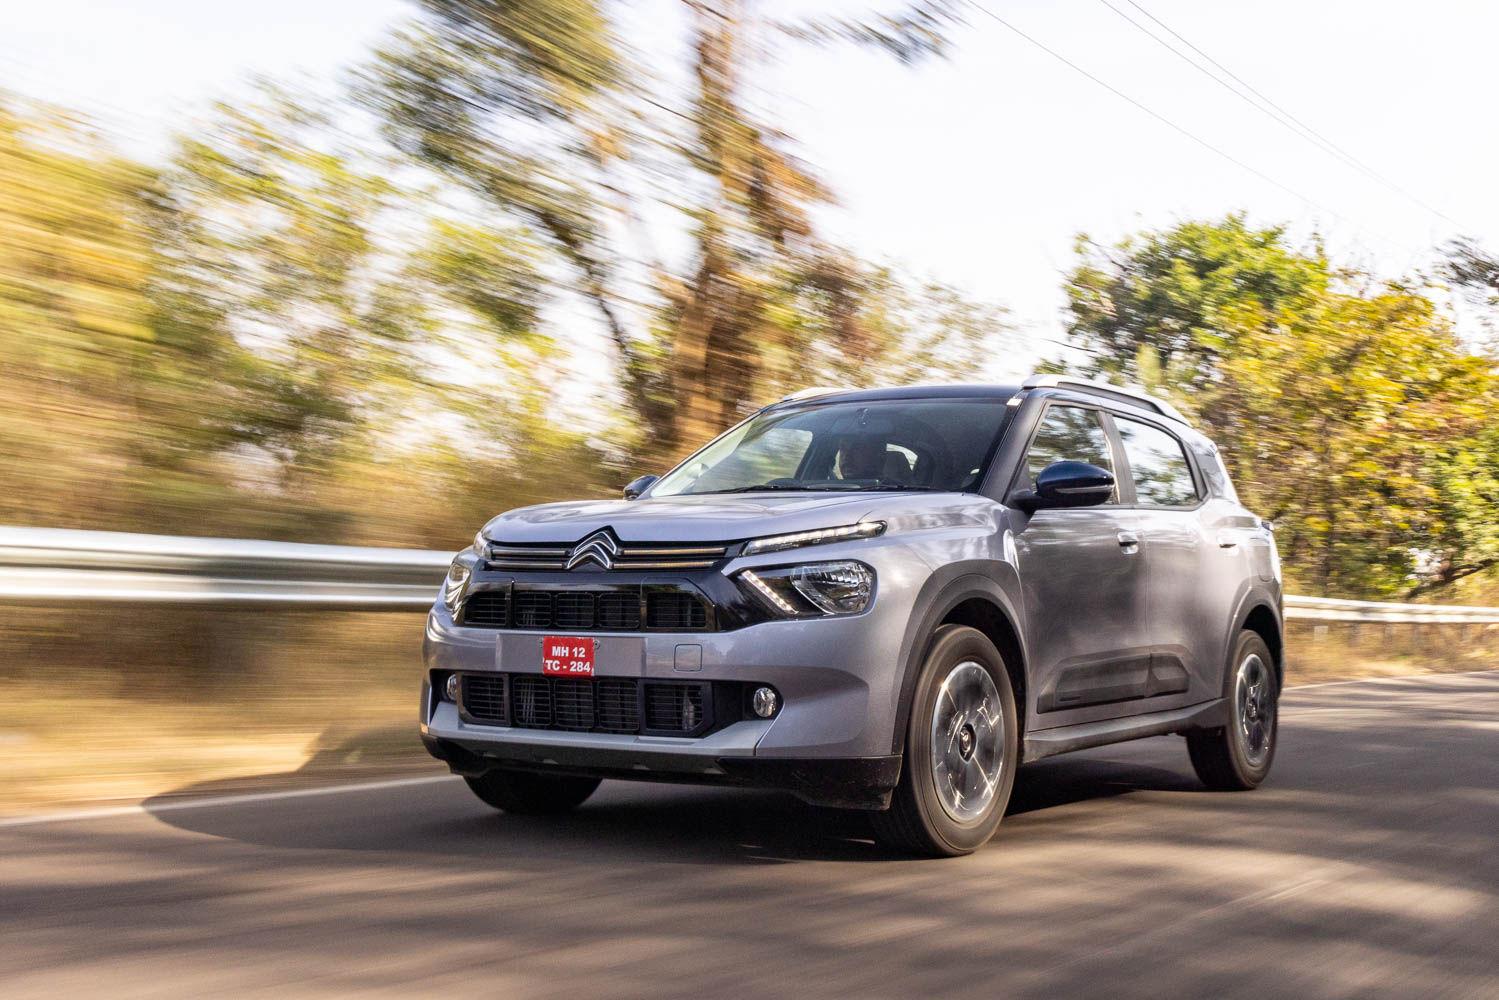 Citroen C3 Aircross Automatic: First Drive Review